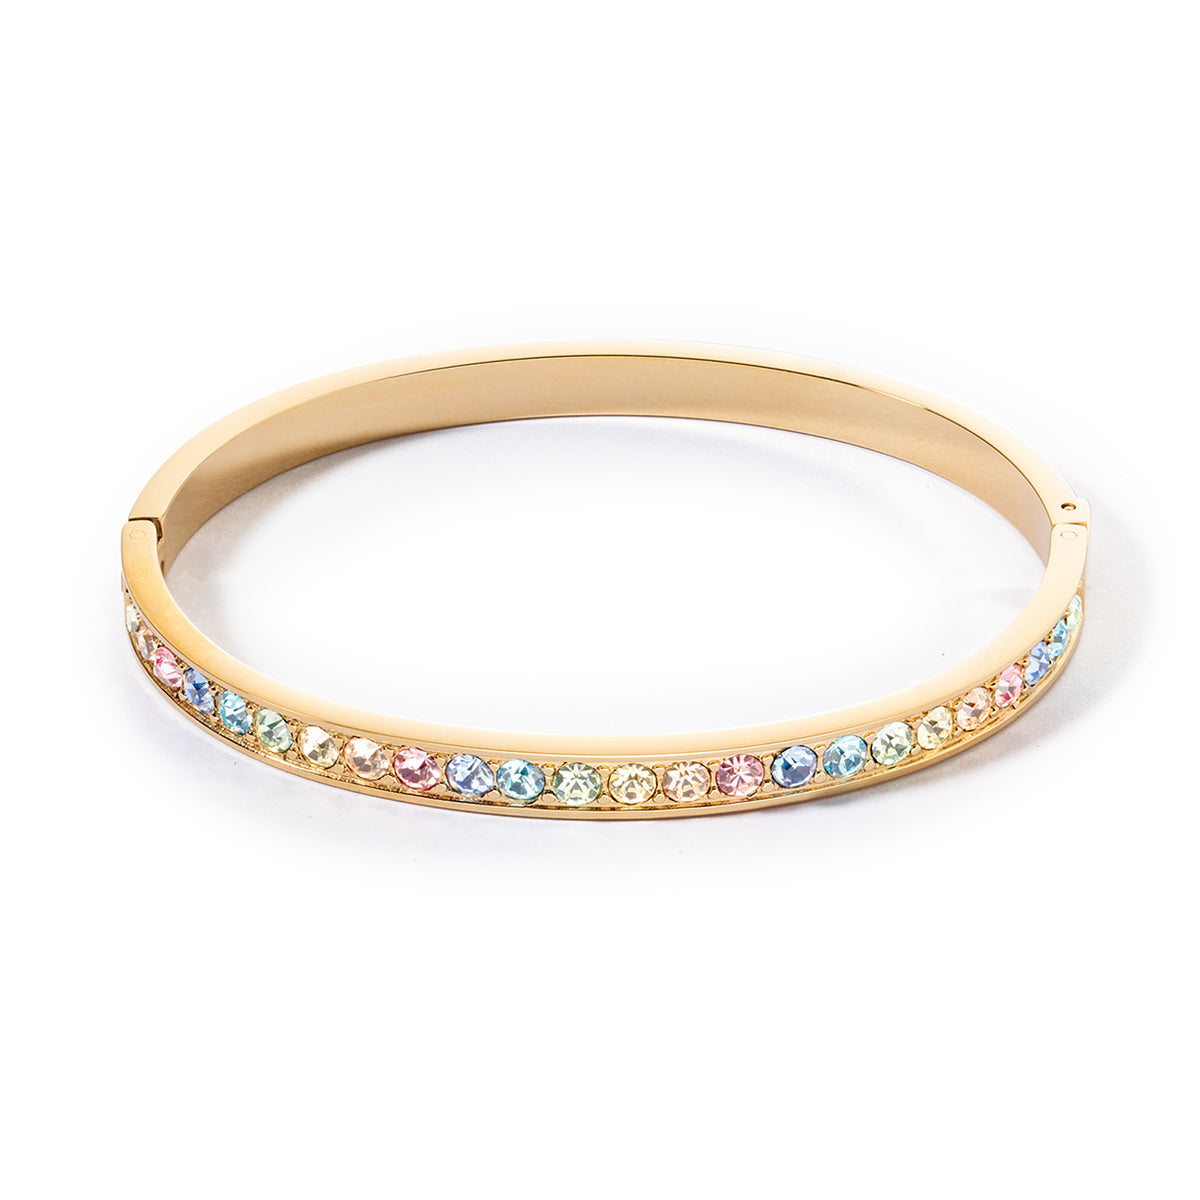 St With Pave Set Large Pastel Multi Colour Crystal Glass & Clip Closure